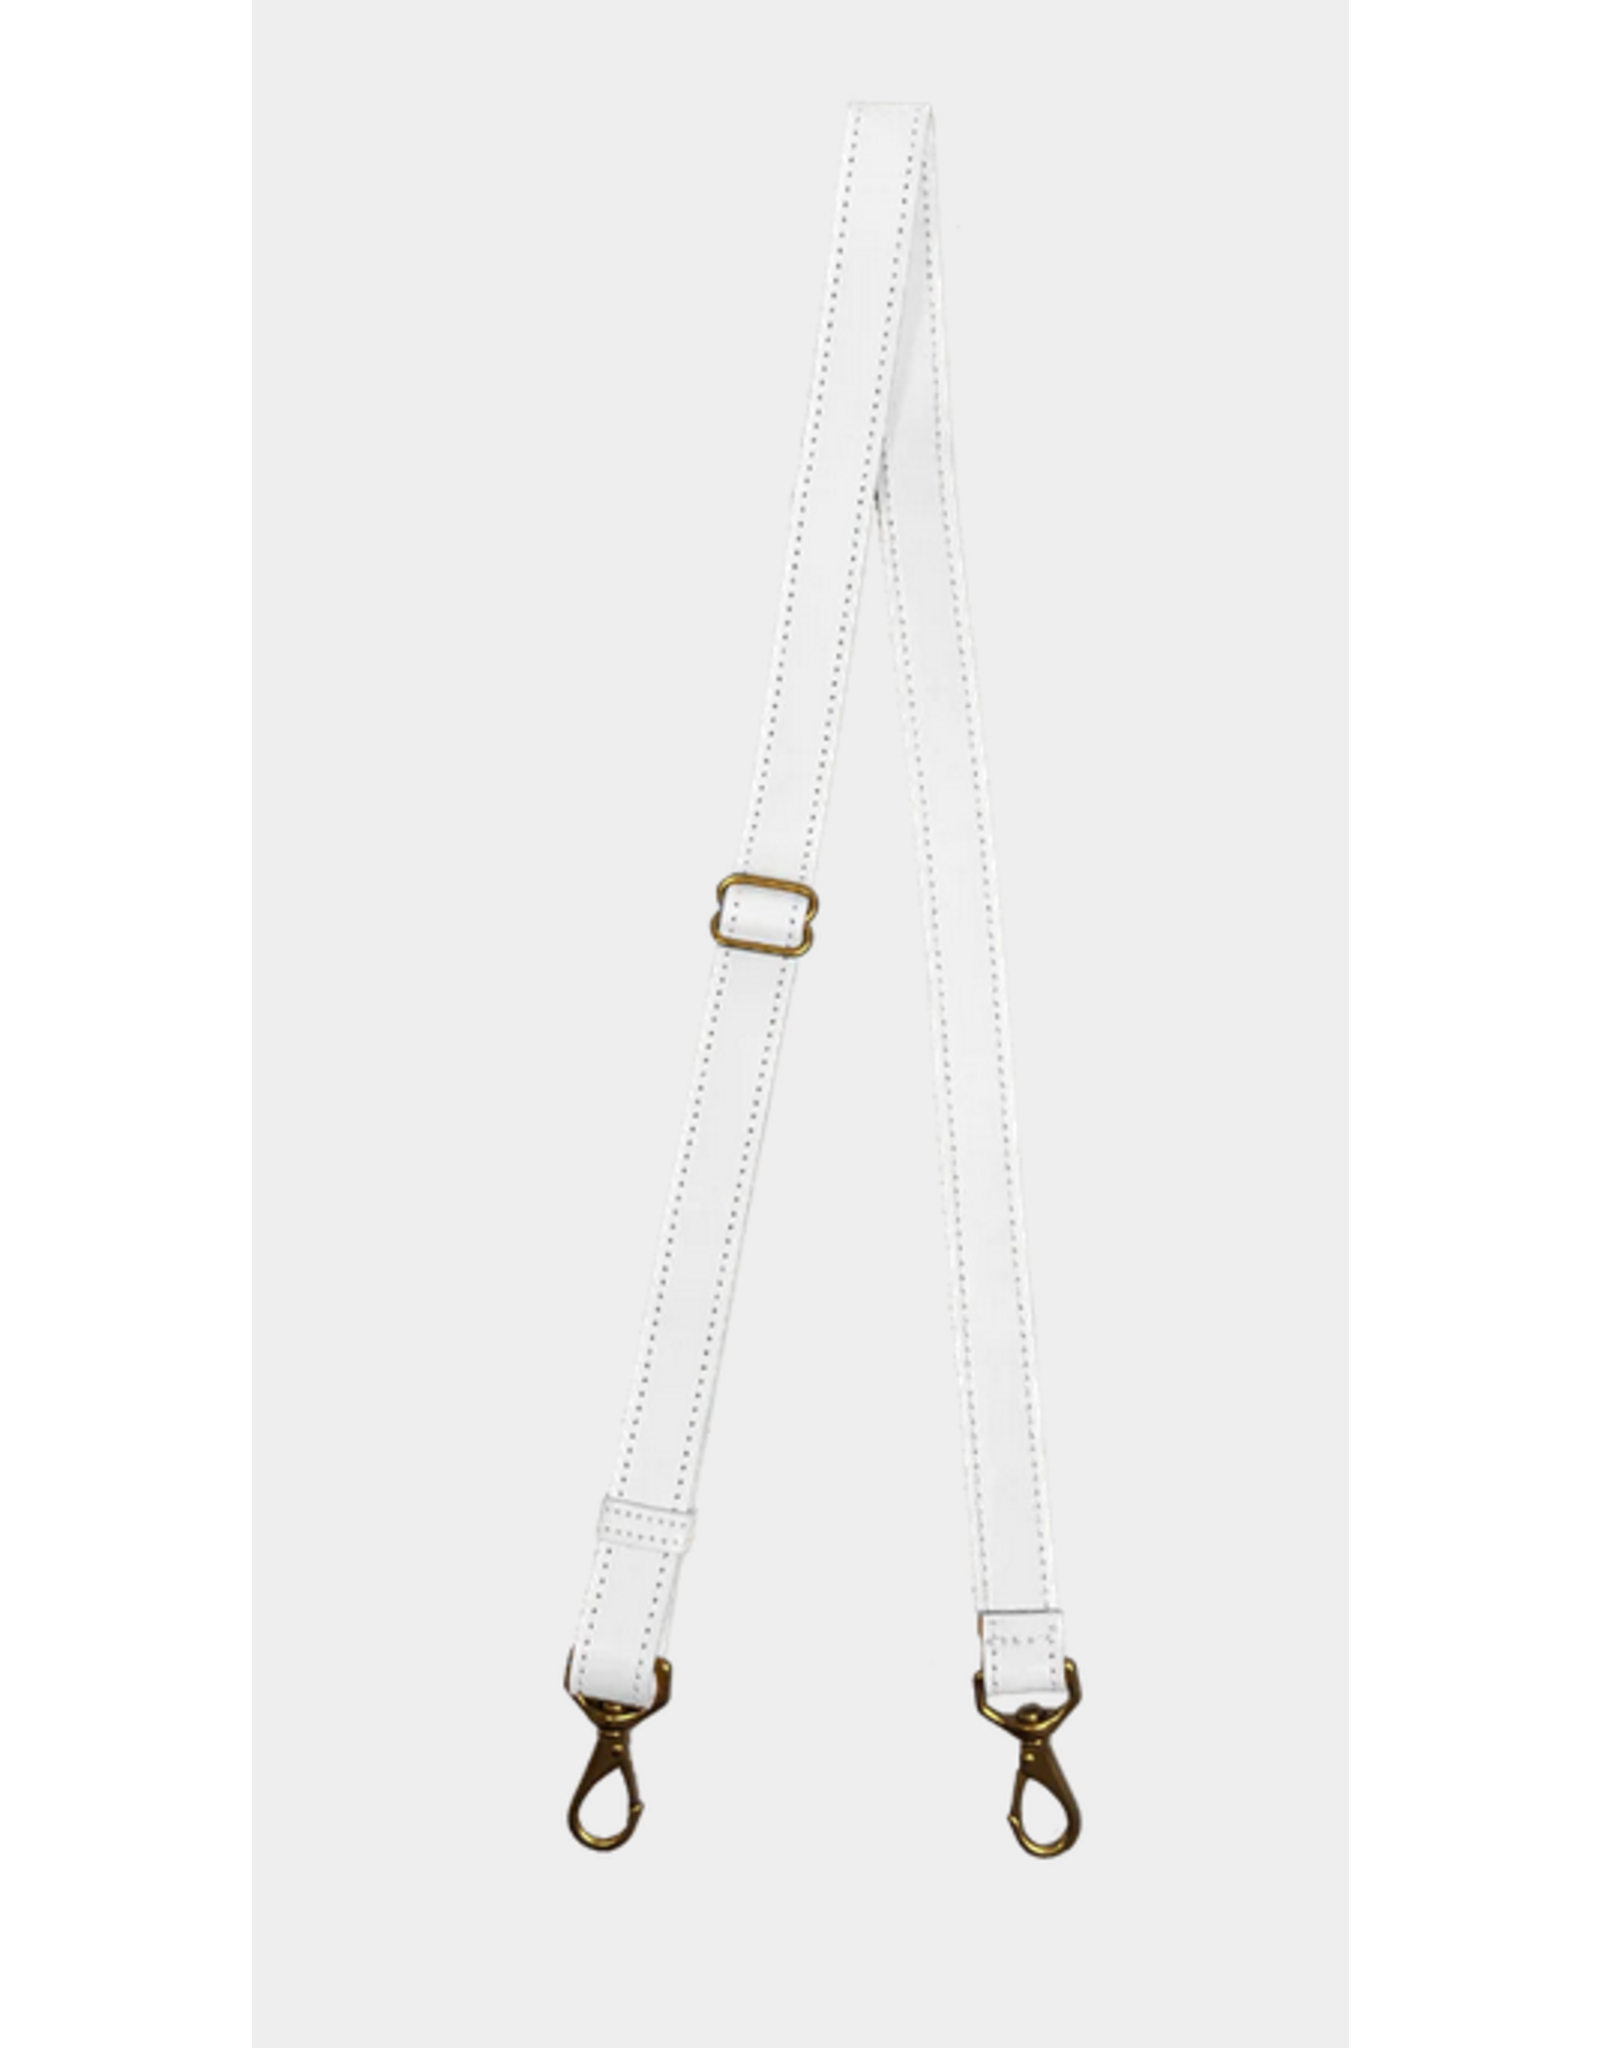 JH Adjustable Strap 1" White Leather